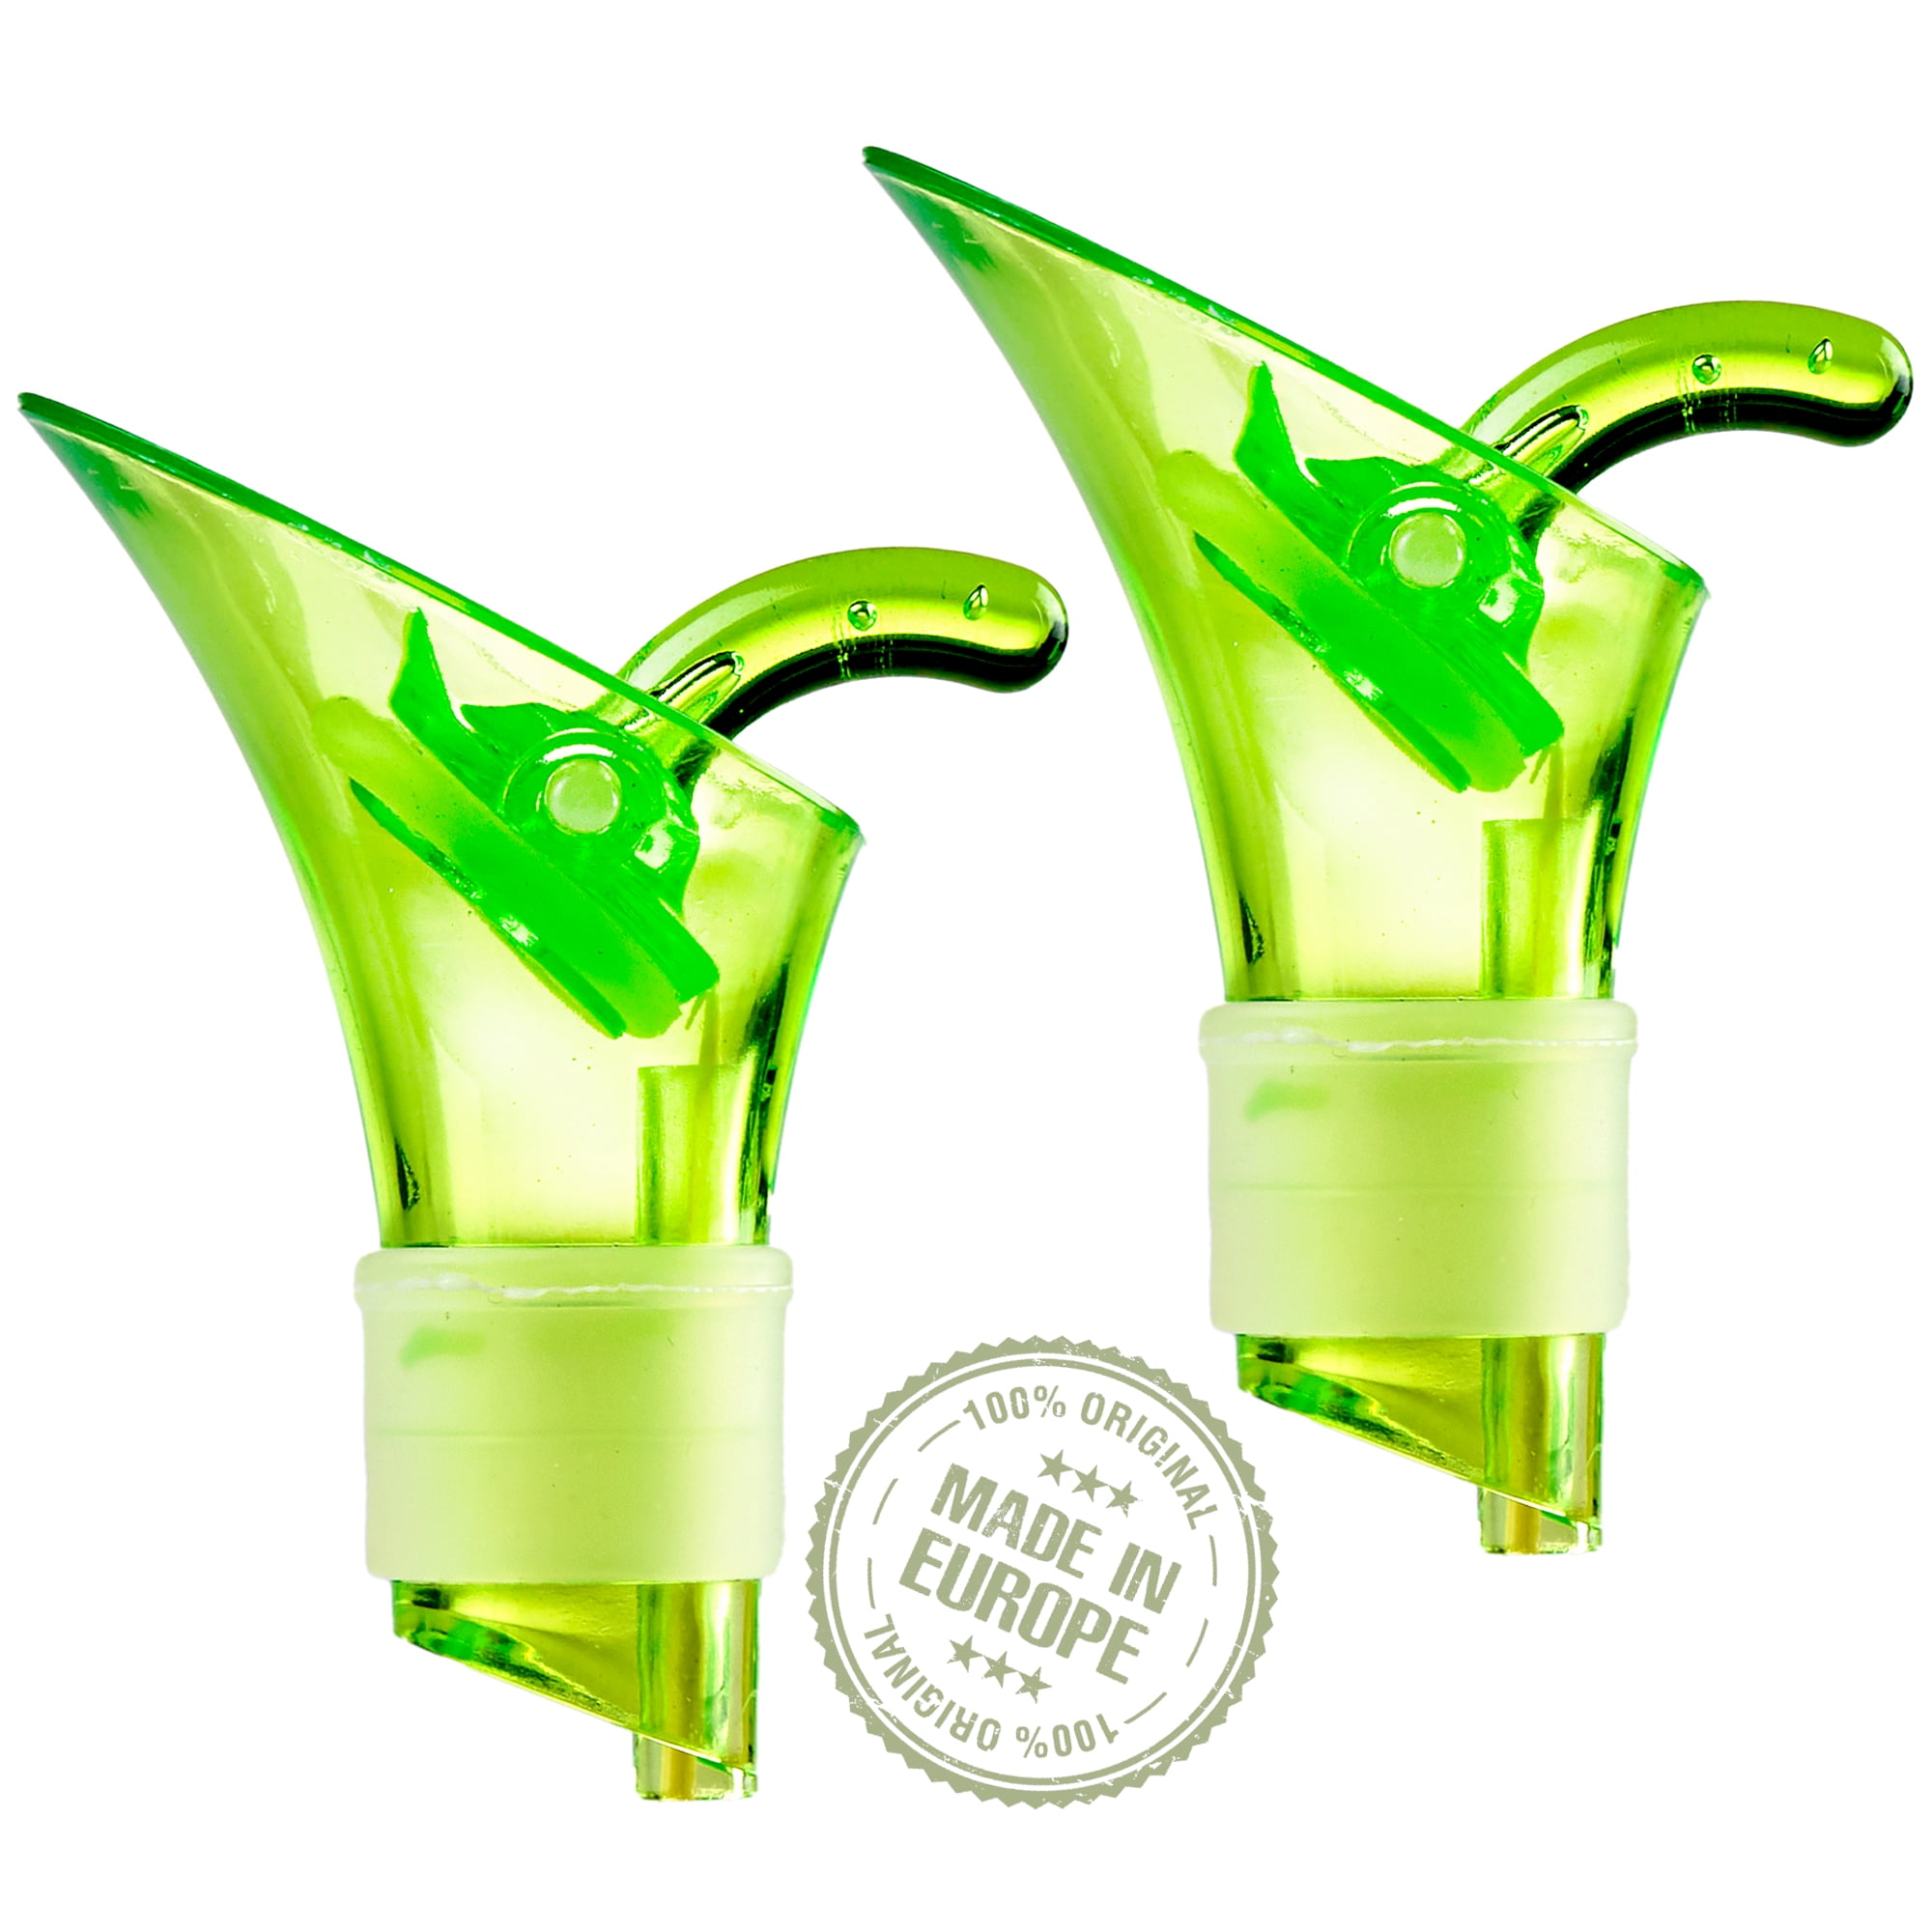 In Pack Promo Gift by Poliakov: a free shaker head pourer